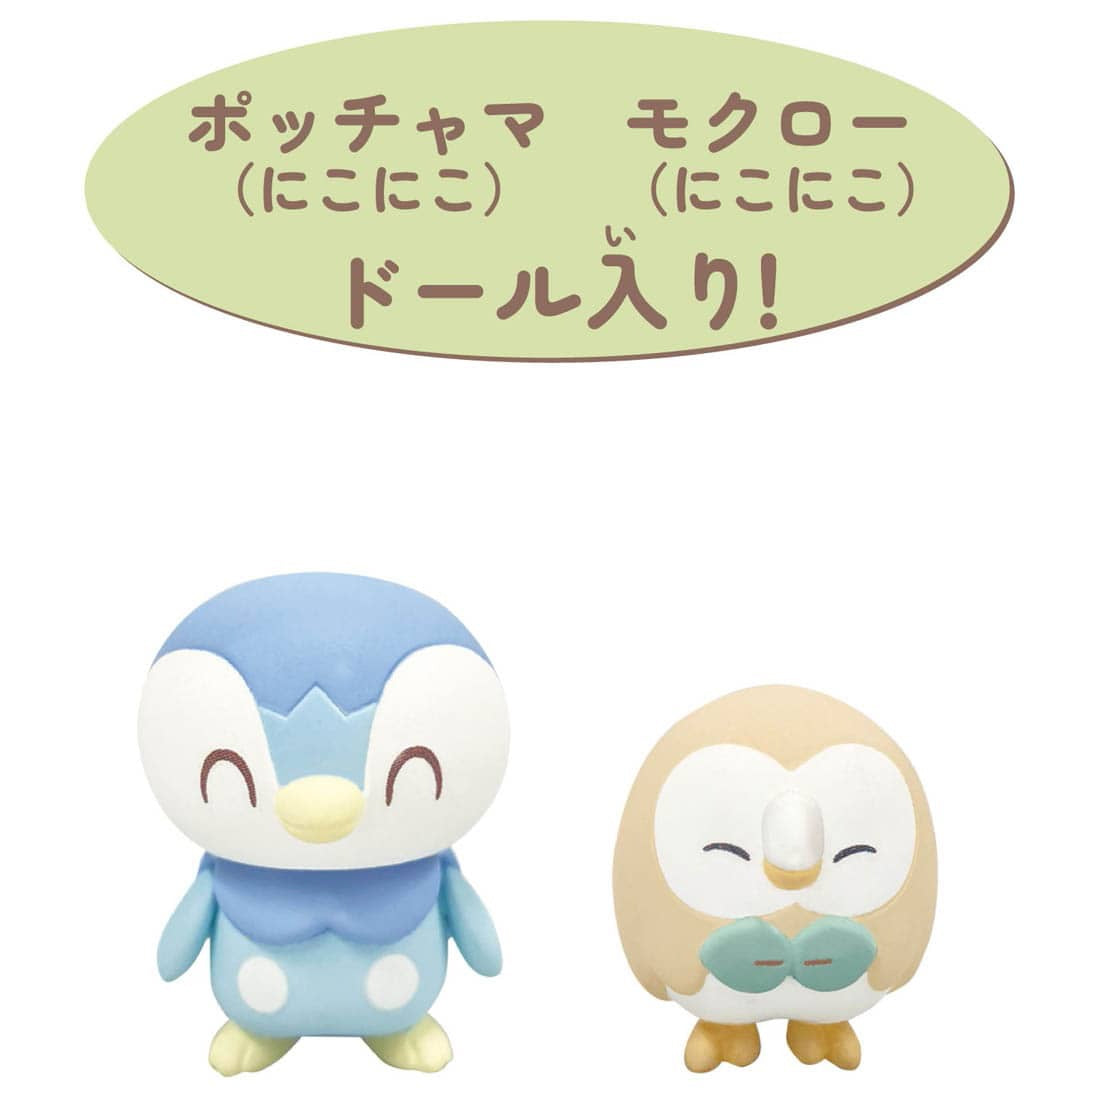 Pokemon Pokepeace House Veranping Terrace &quot;Rowlet &amp; Piplup&quot;-Takara Tomy-Ace Cards &amp; Collectibles